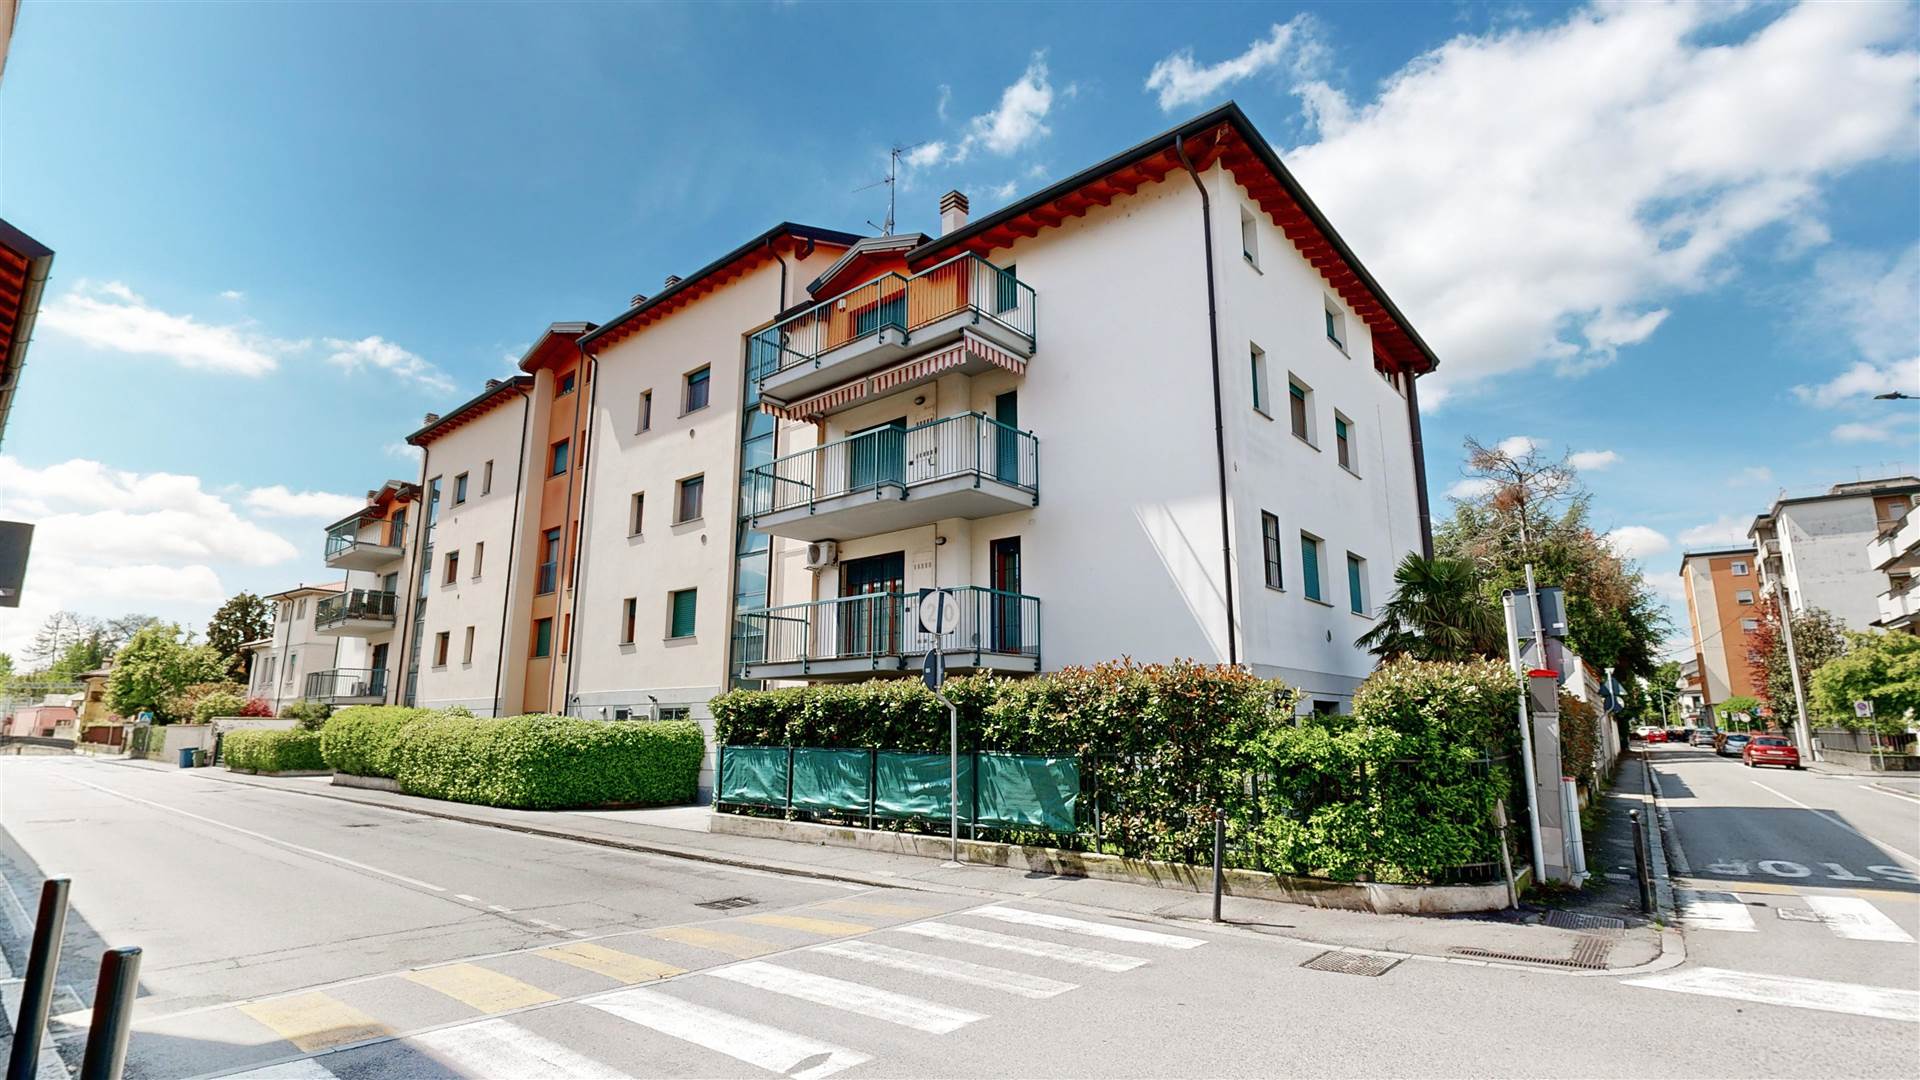 MELZO, Apartment for sale of 162 Sq. mt., Excellent Condition, Heating Individual heating system, Energetic class: G, Epi: 300 kwh/m2 year, placed at 